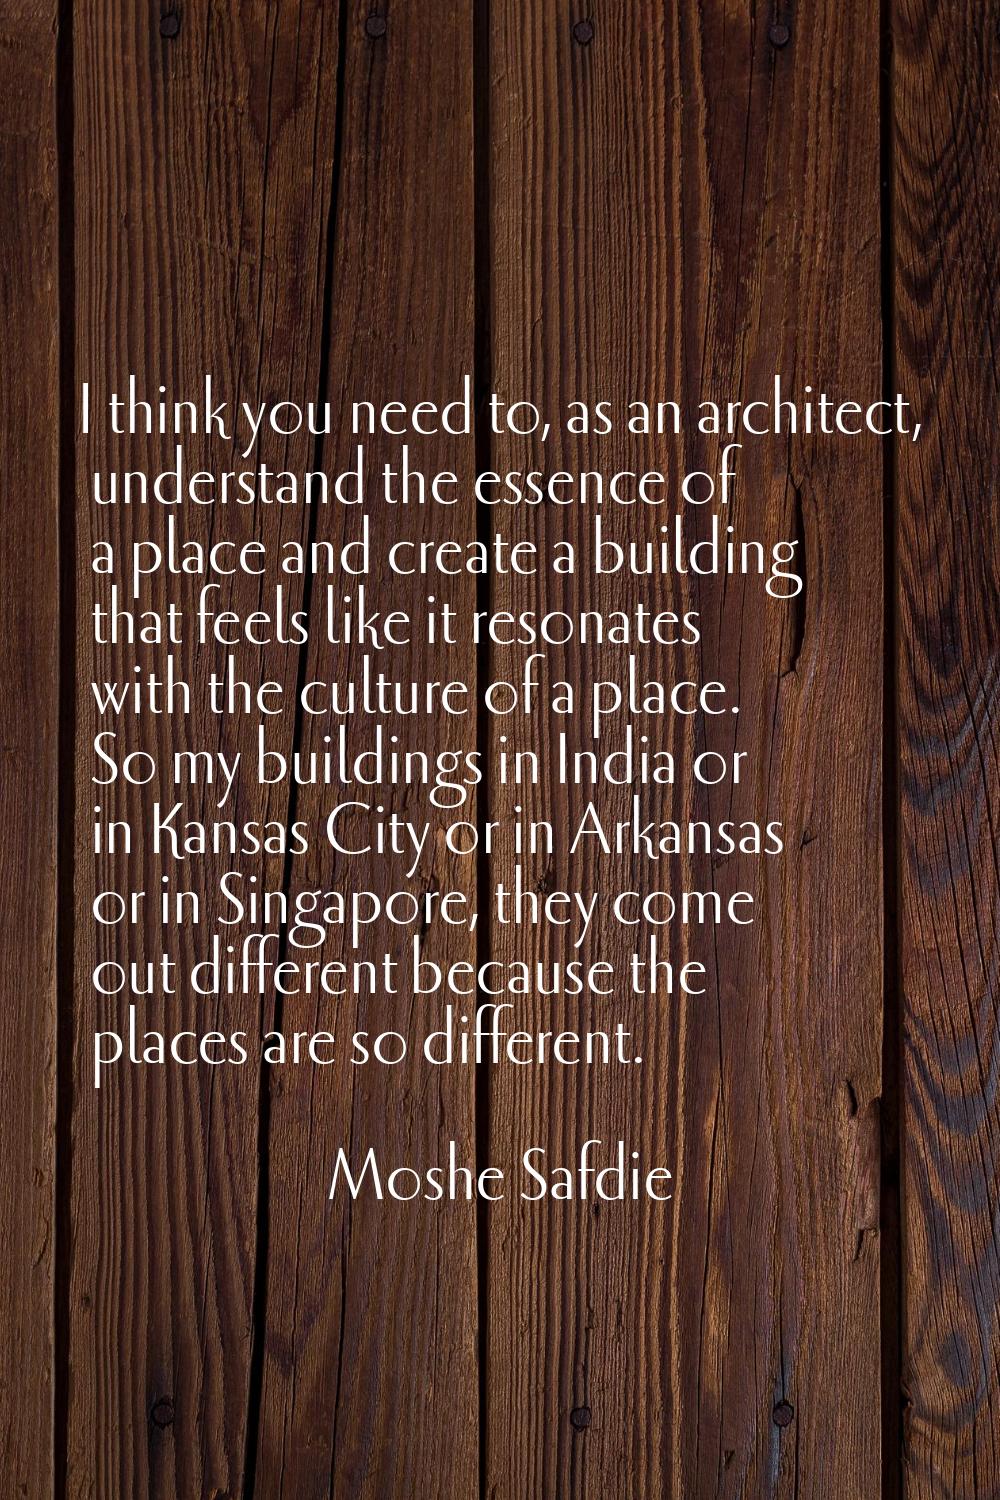 I think you need to, as an architect, understand the essence of a place and create a building that 